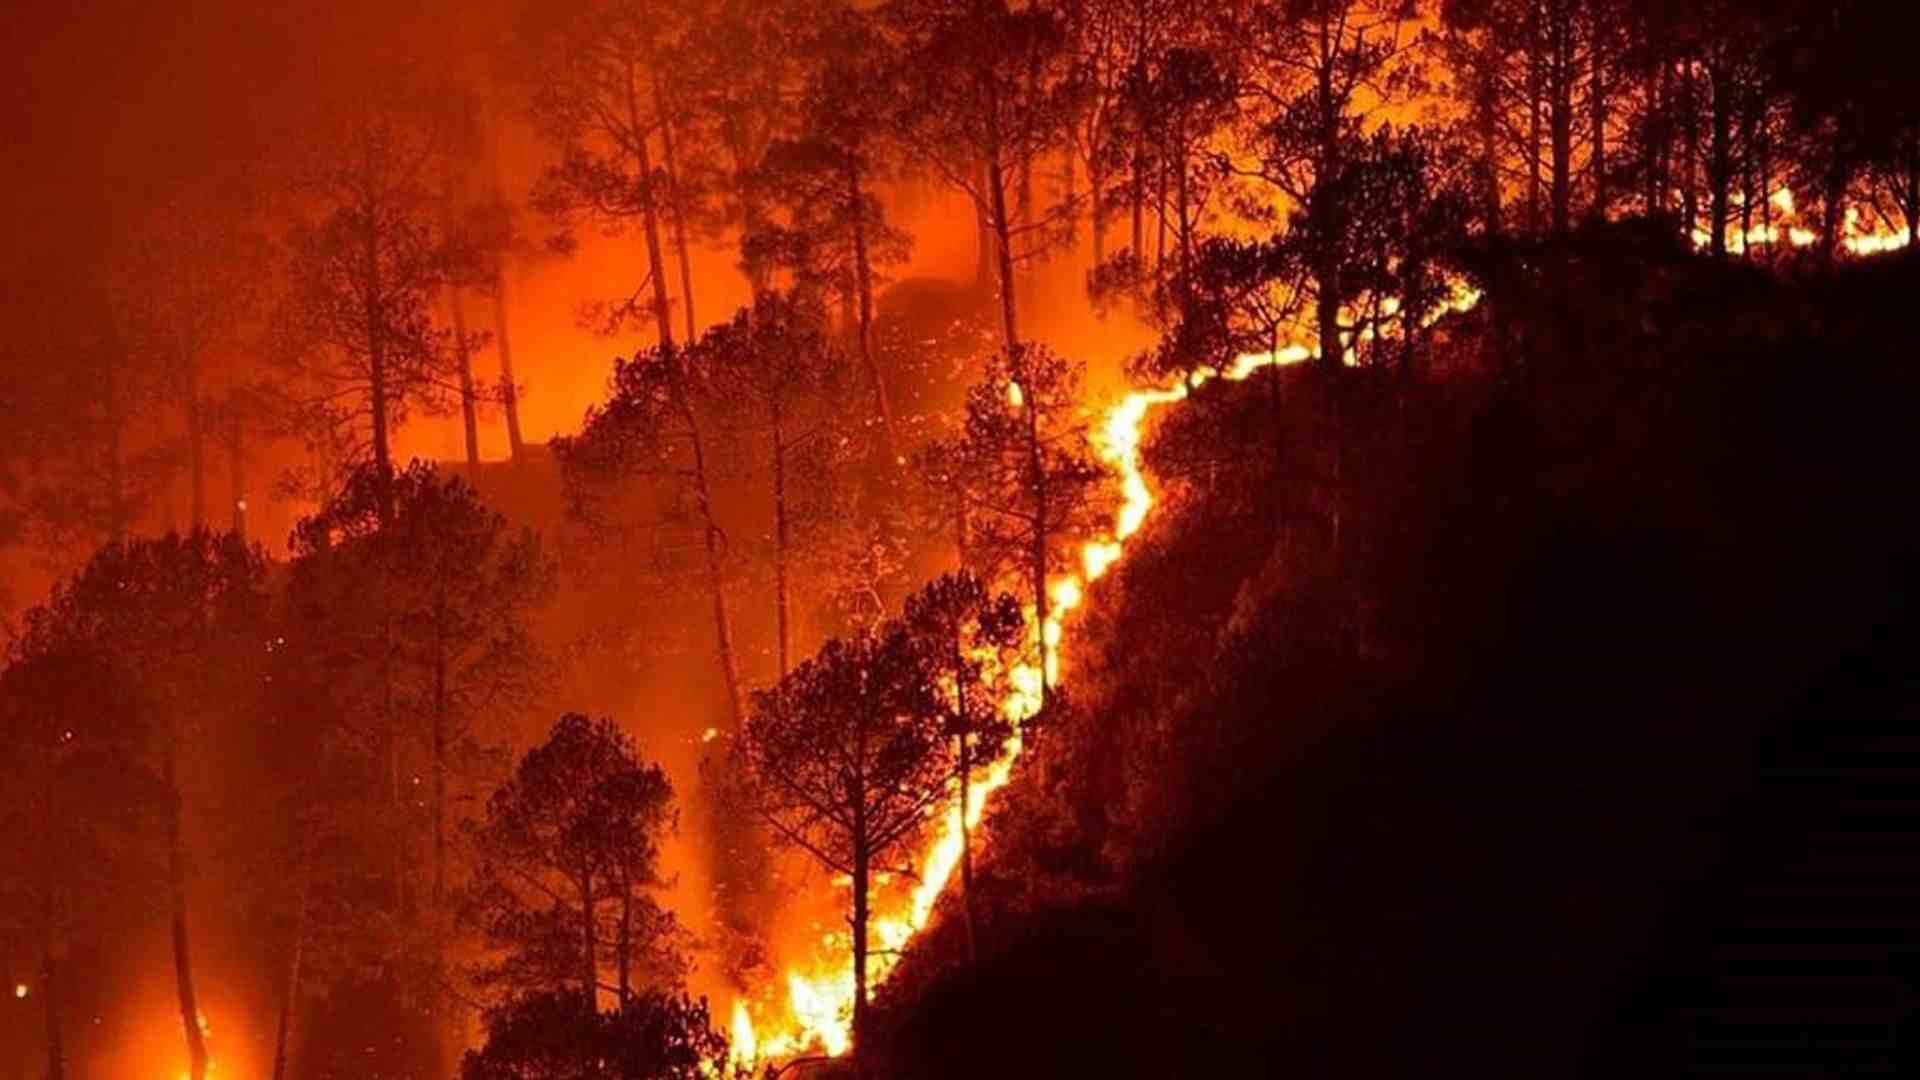 Uttarakhand Battles Driest April on Record amidst forest fires